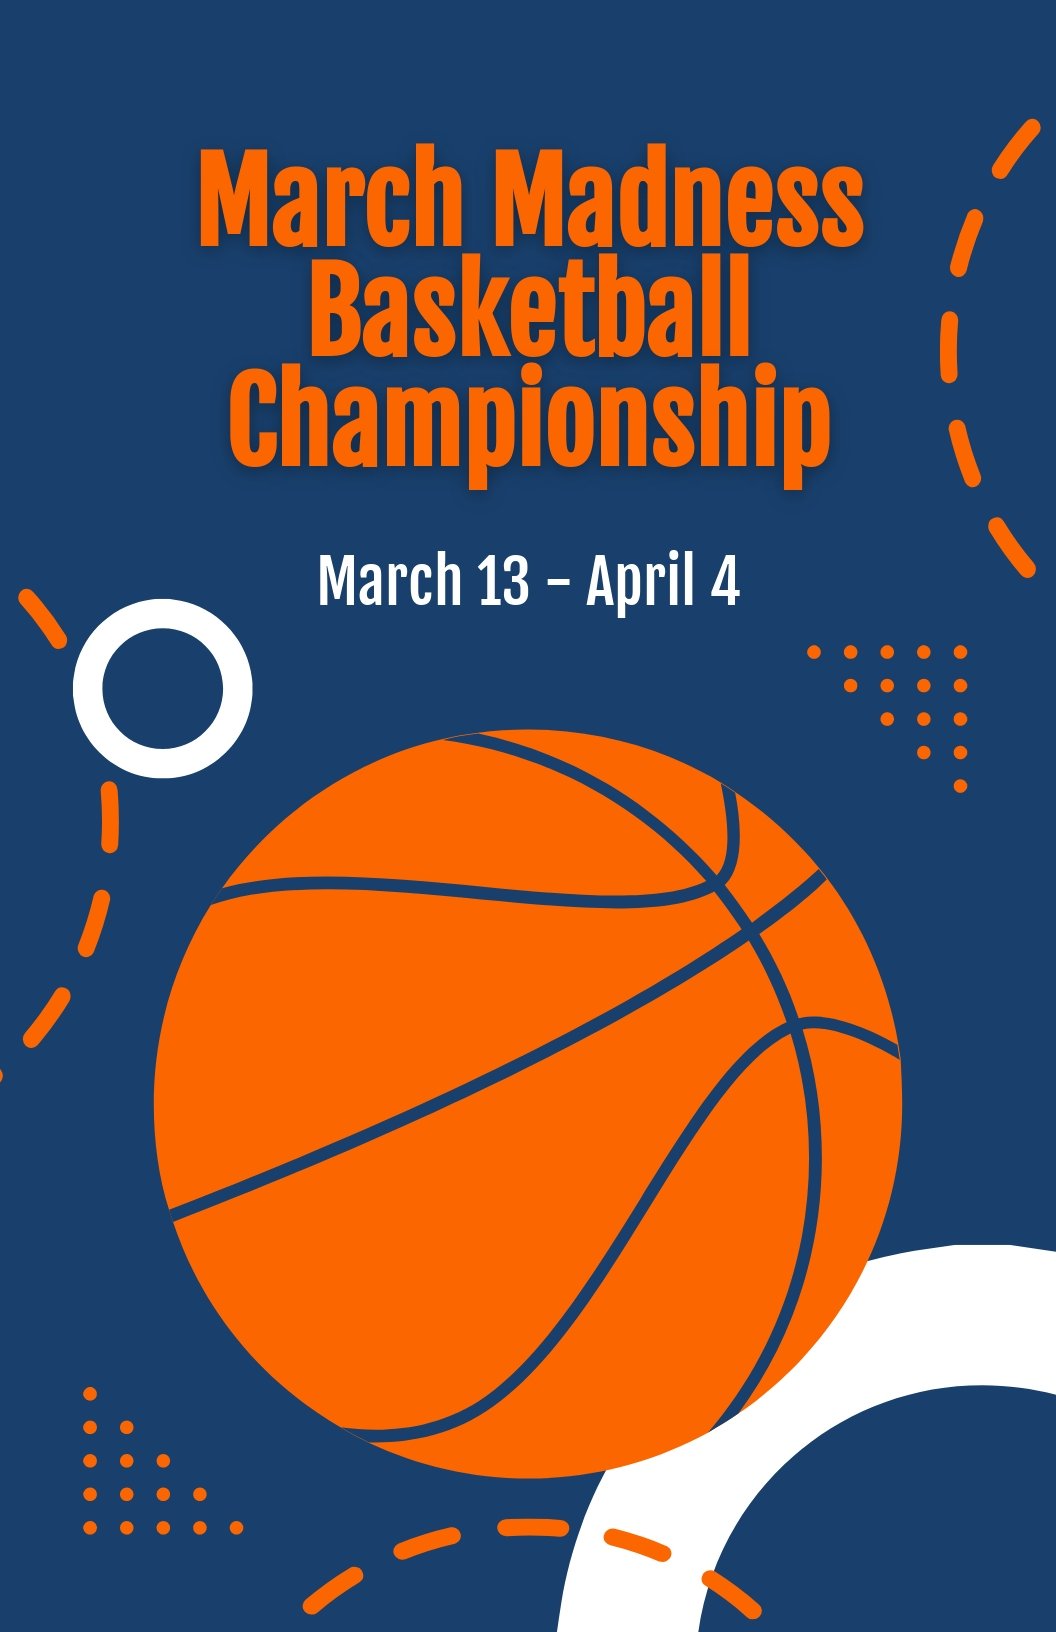 March Madness Basketball Championship Poster Template